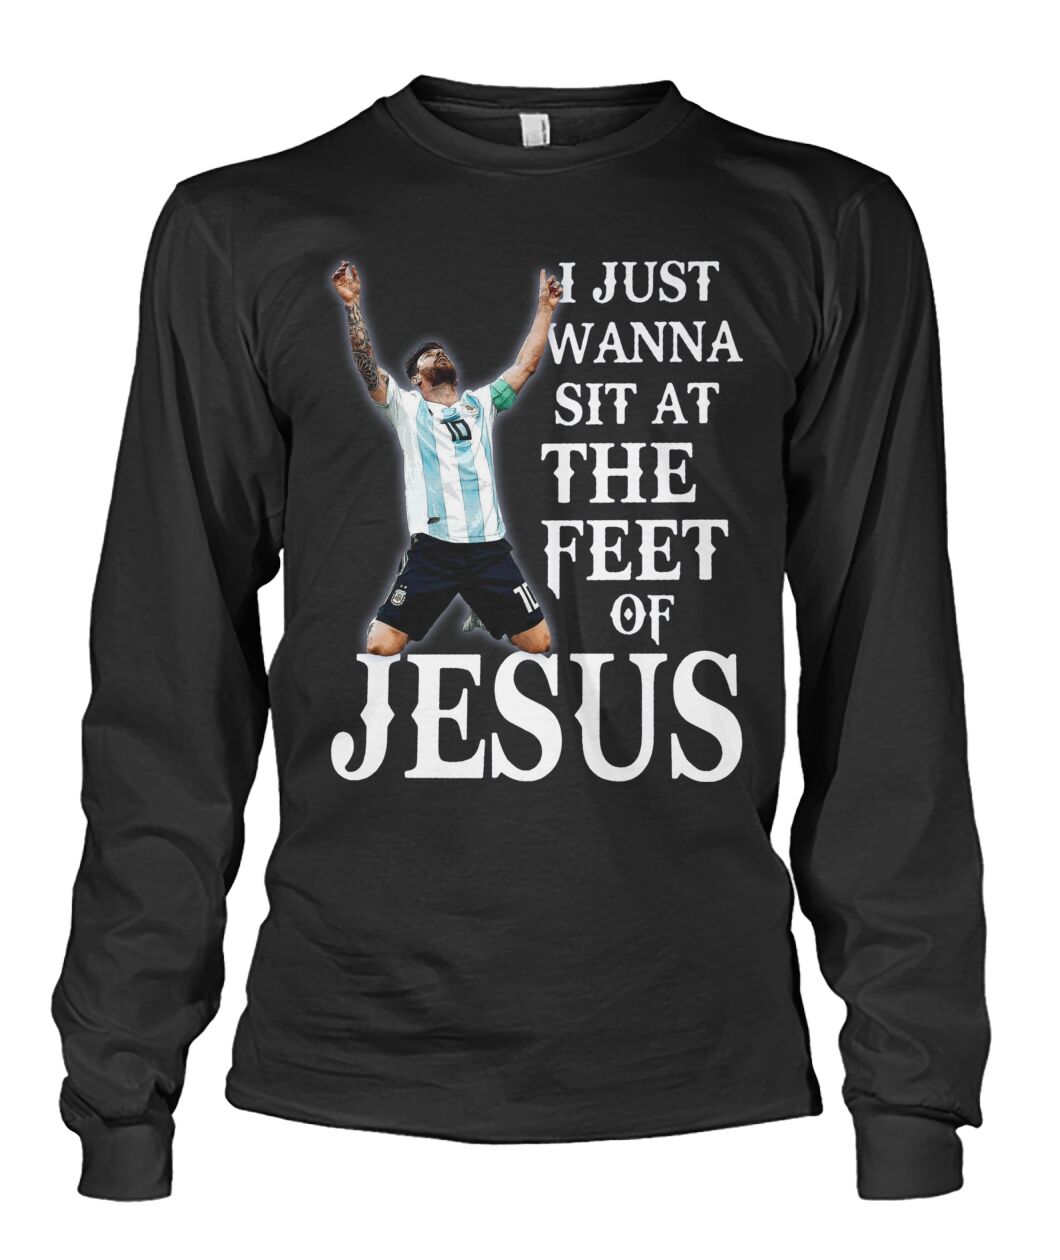 i just wanna sit at the feel of jesus messi shirt 5504 GhknE